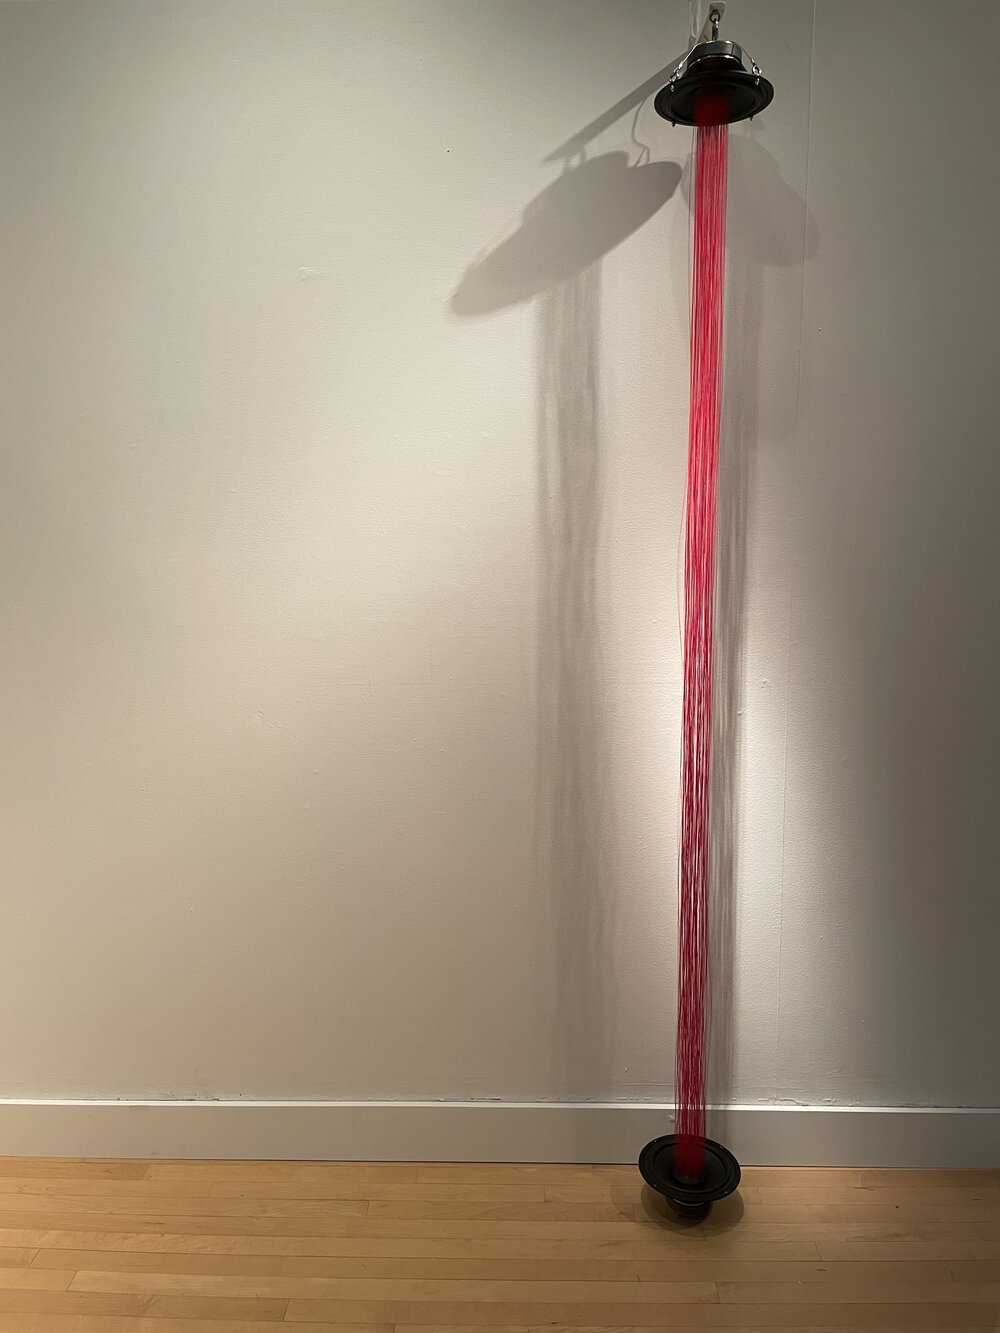 a sculpture consisting of two speakers connected by dozens of red threads, spanning a gallery wall